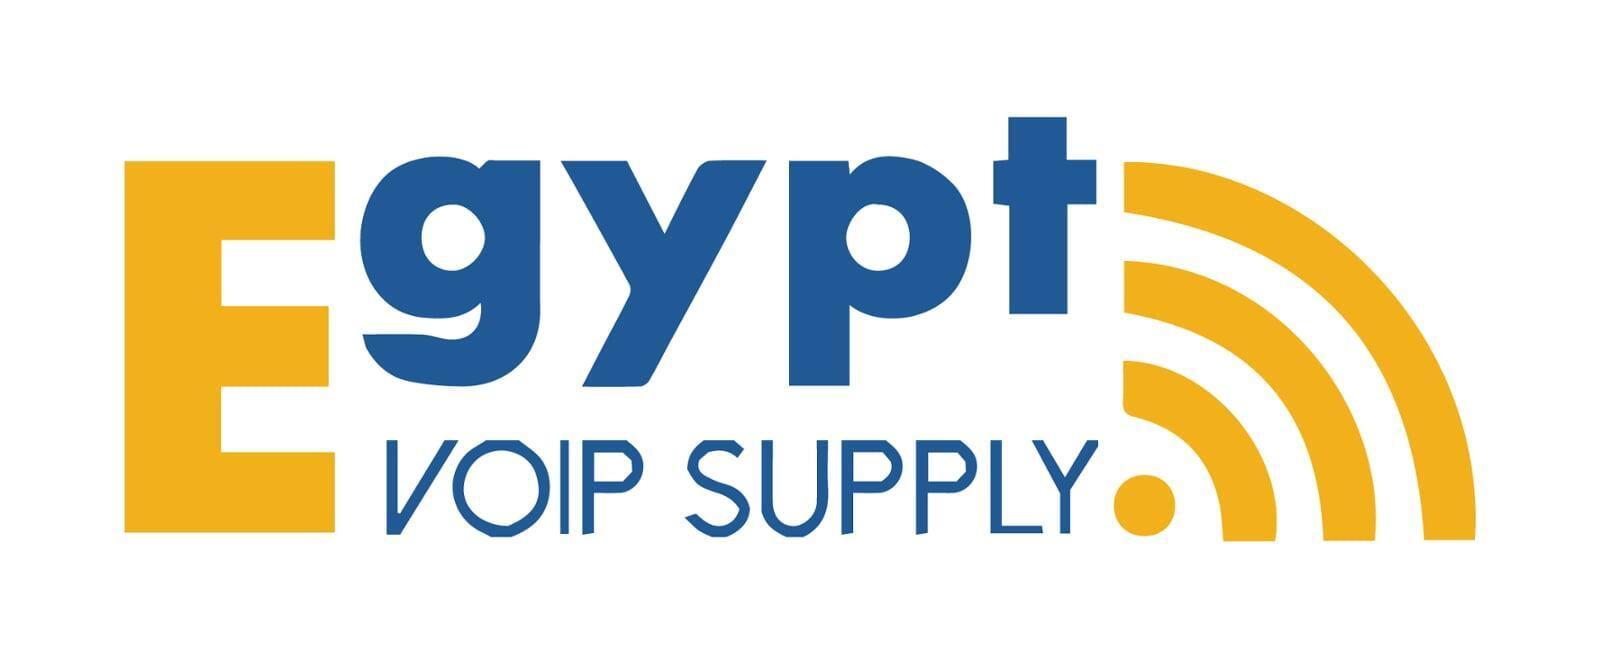 Egypt VoIP Supply